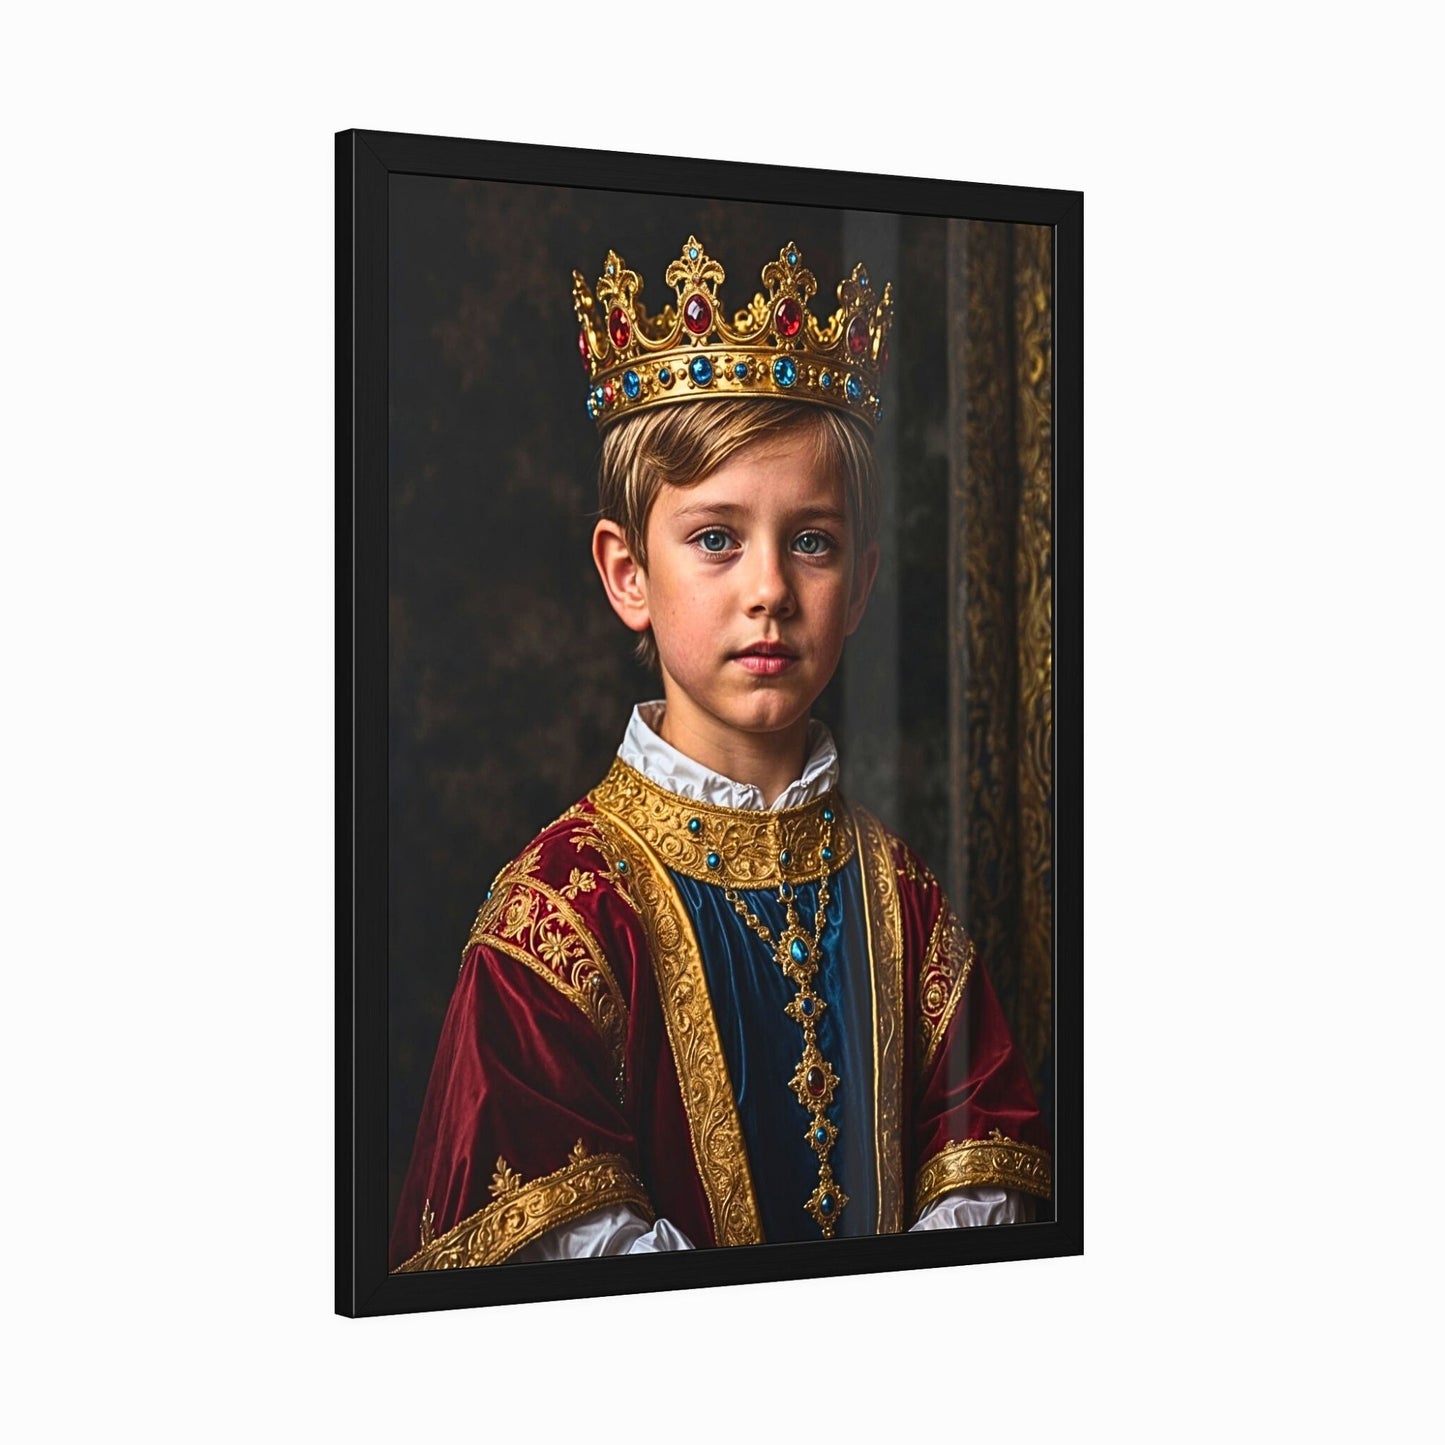 Turn your child's photo into a regal masterpiece with our Custom Kid Royal Portraits. Ideal for birthdays and special events, these personalized portraits of your little King or Queen blend modern artistry with classic royal themes. Perfect for unique gifts and stylish kids' room decor.